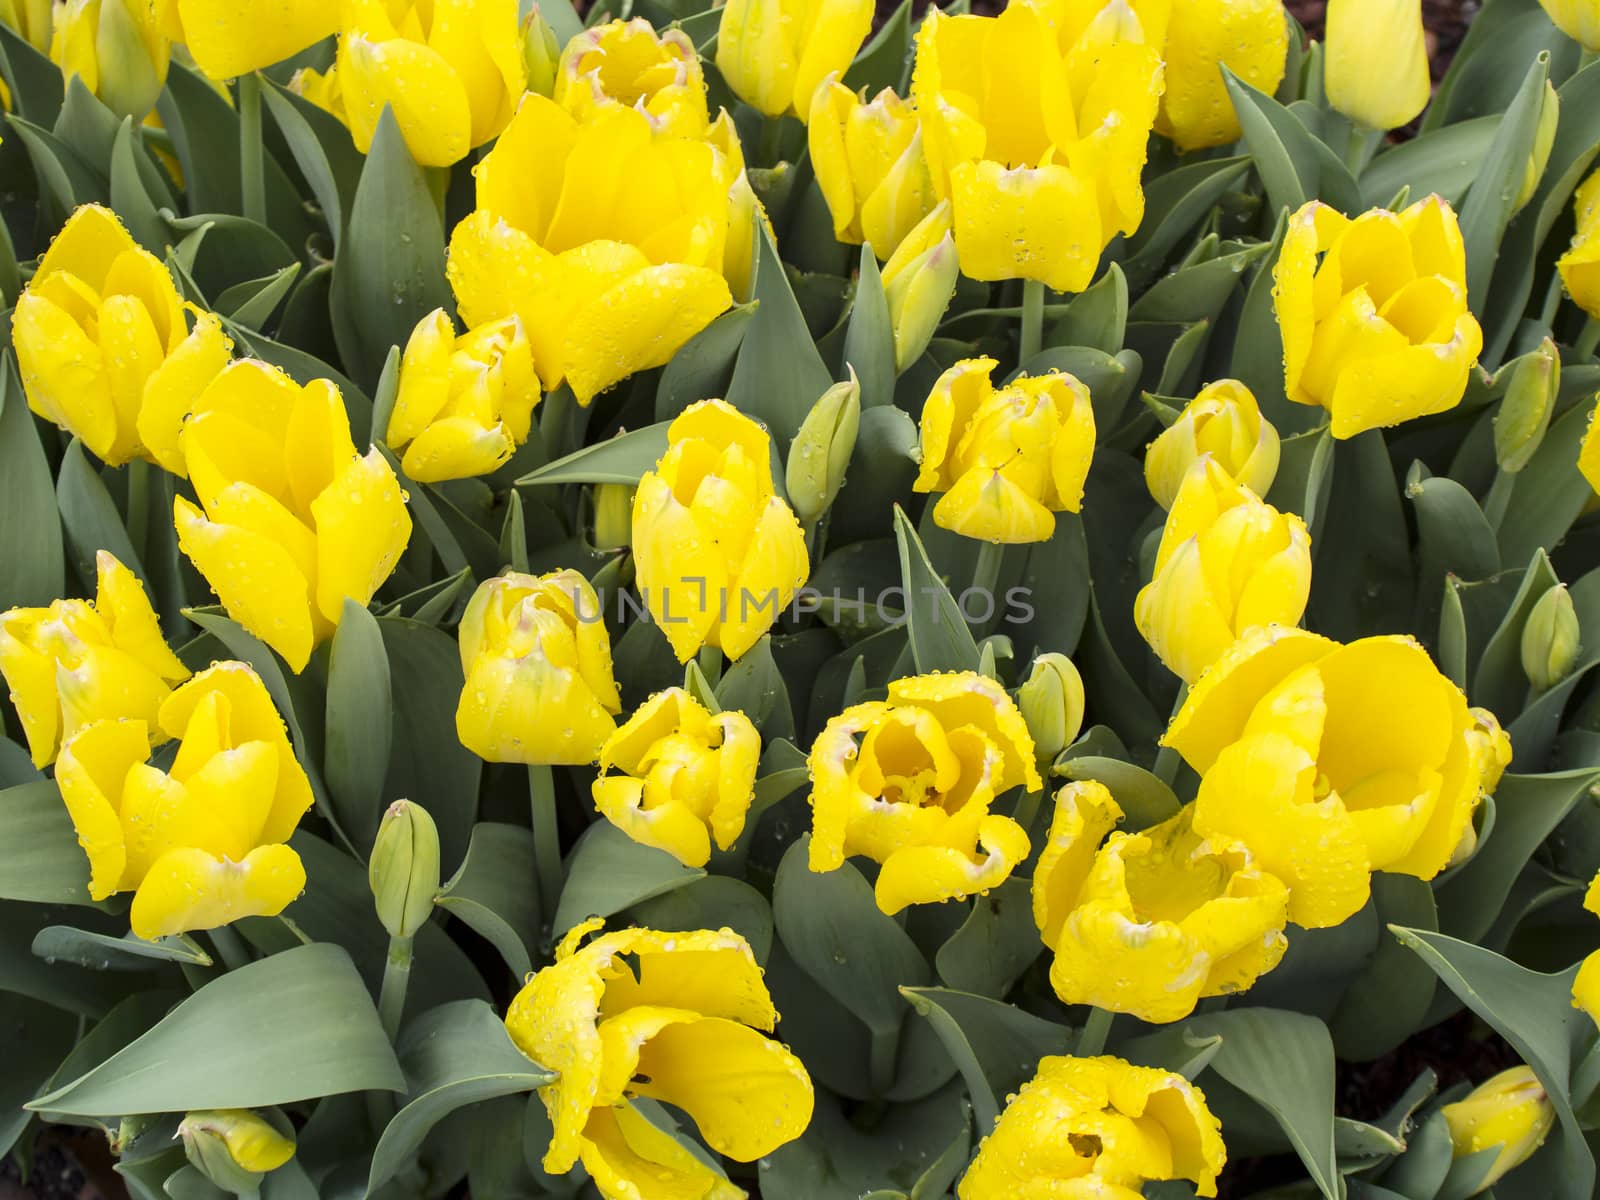 Yellow Tulips by leieng